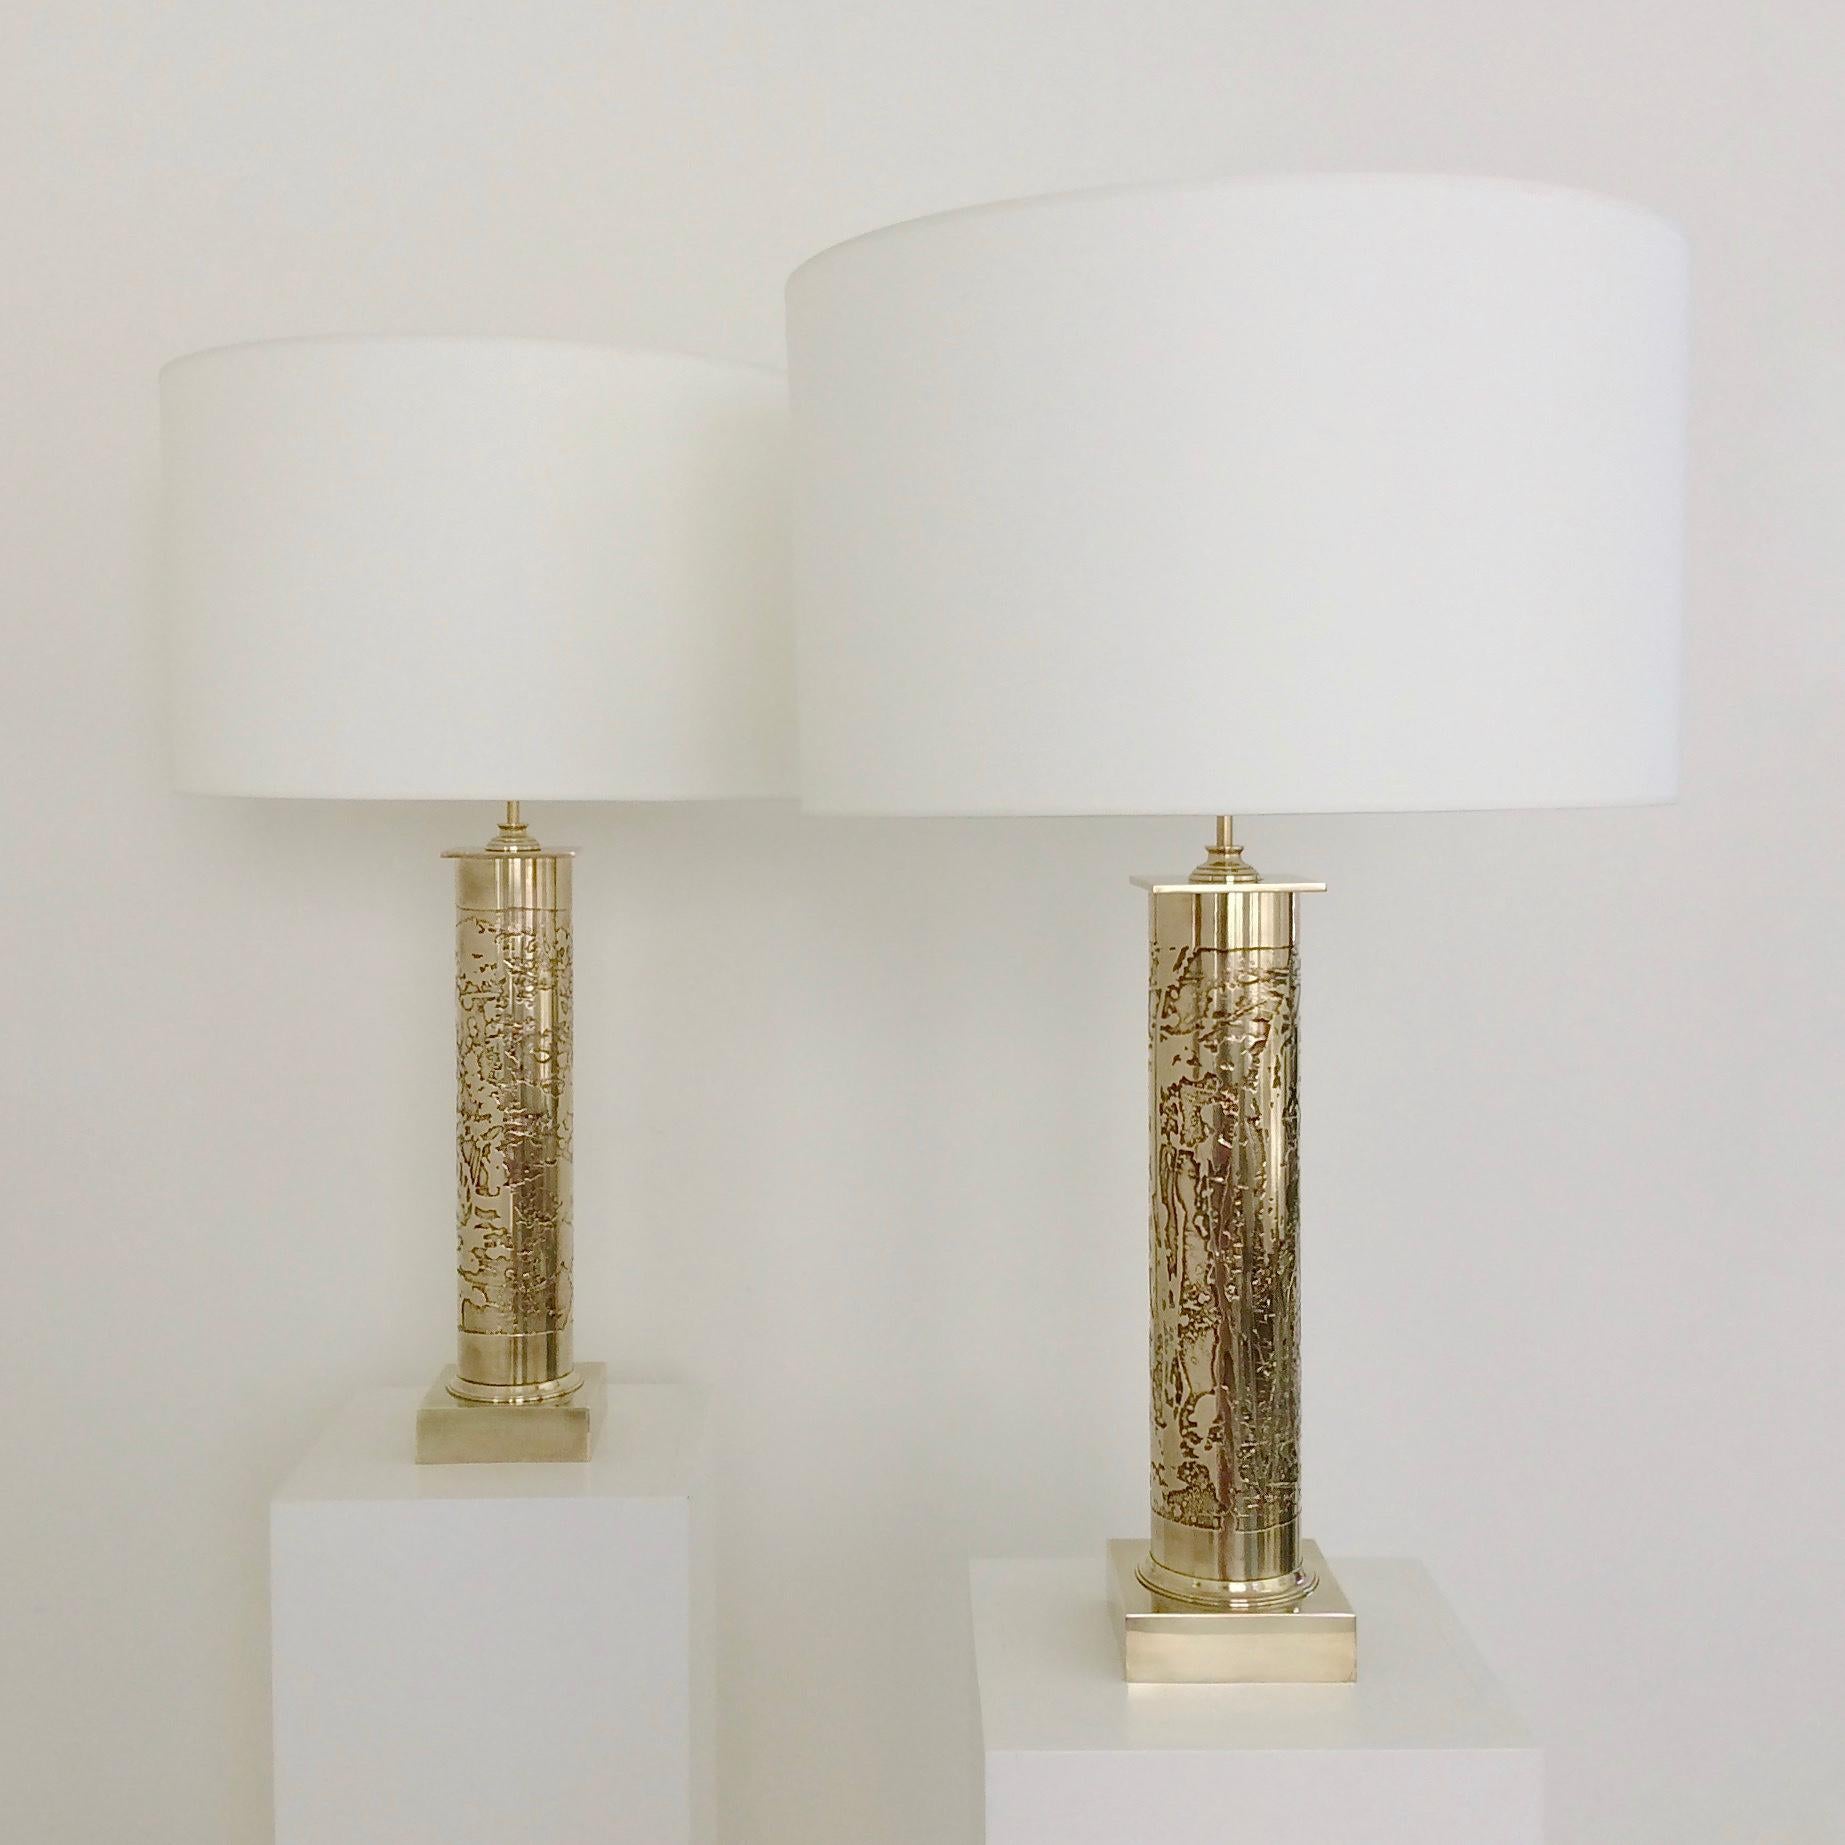 Etched Willy Daro Attributed Design Pair of Table Lamps, circa 1975, Belgium